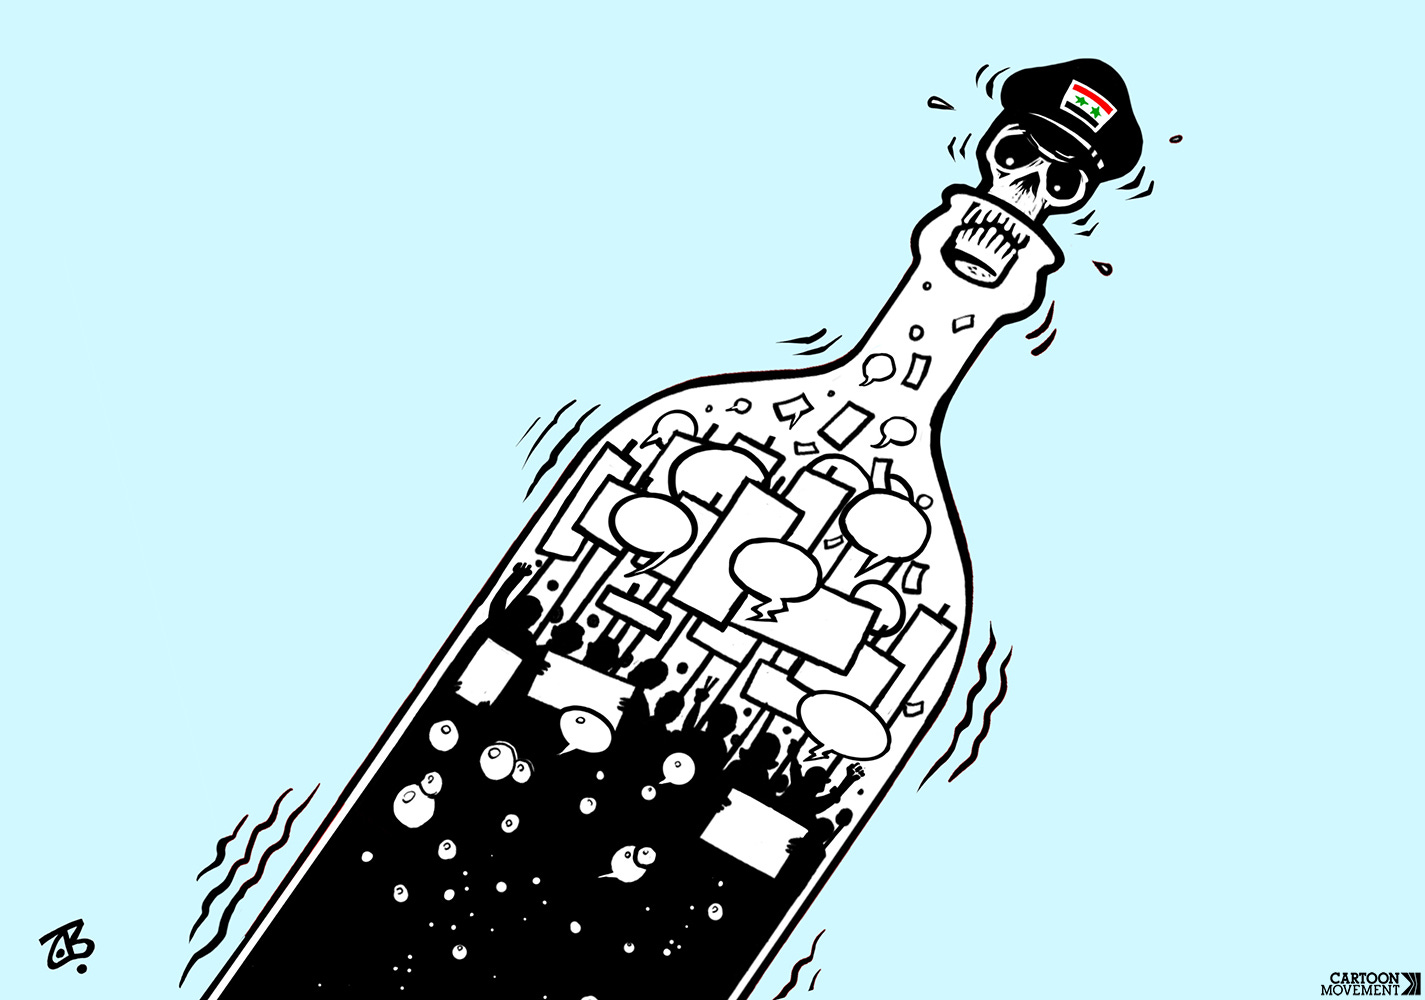 Cartoon showing a bottle capped by a skull with a cap with the flag of Syria. Inside the bottle are people protesting, their speech bubbles rising like the bubbles of champagne to remove the bottle cap.